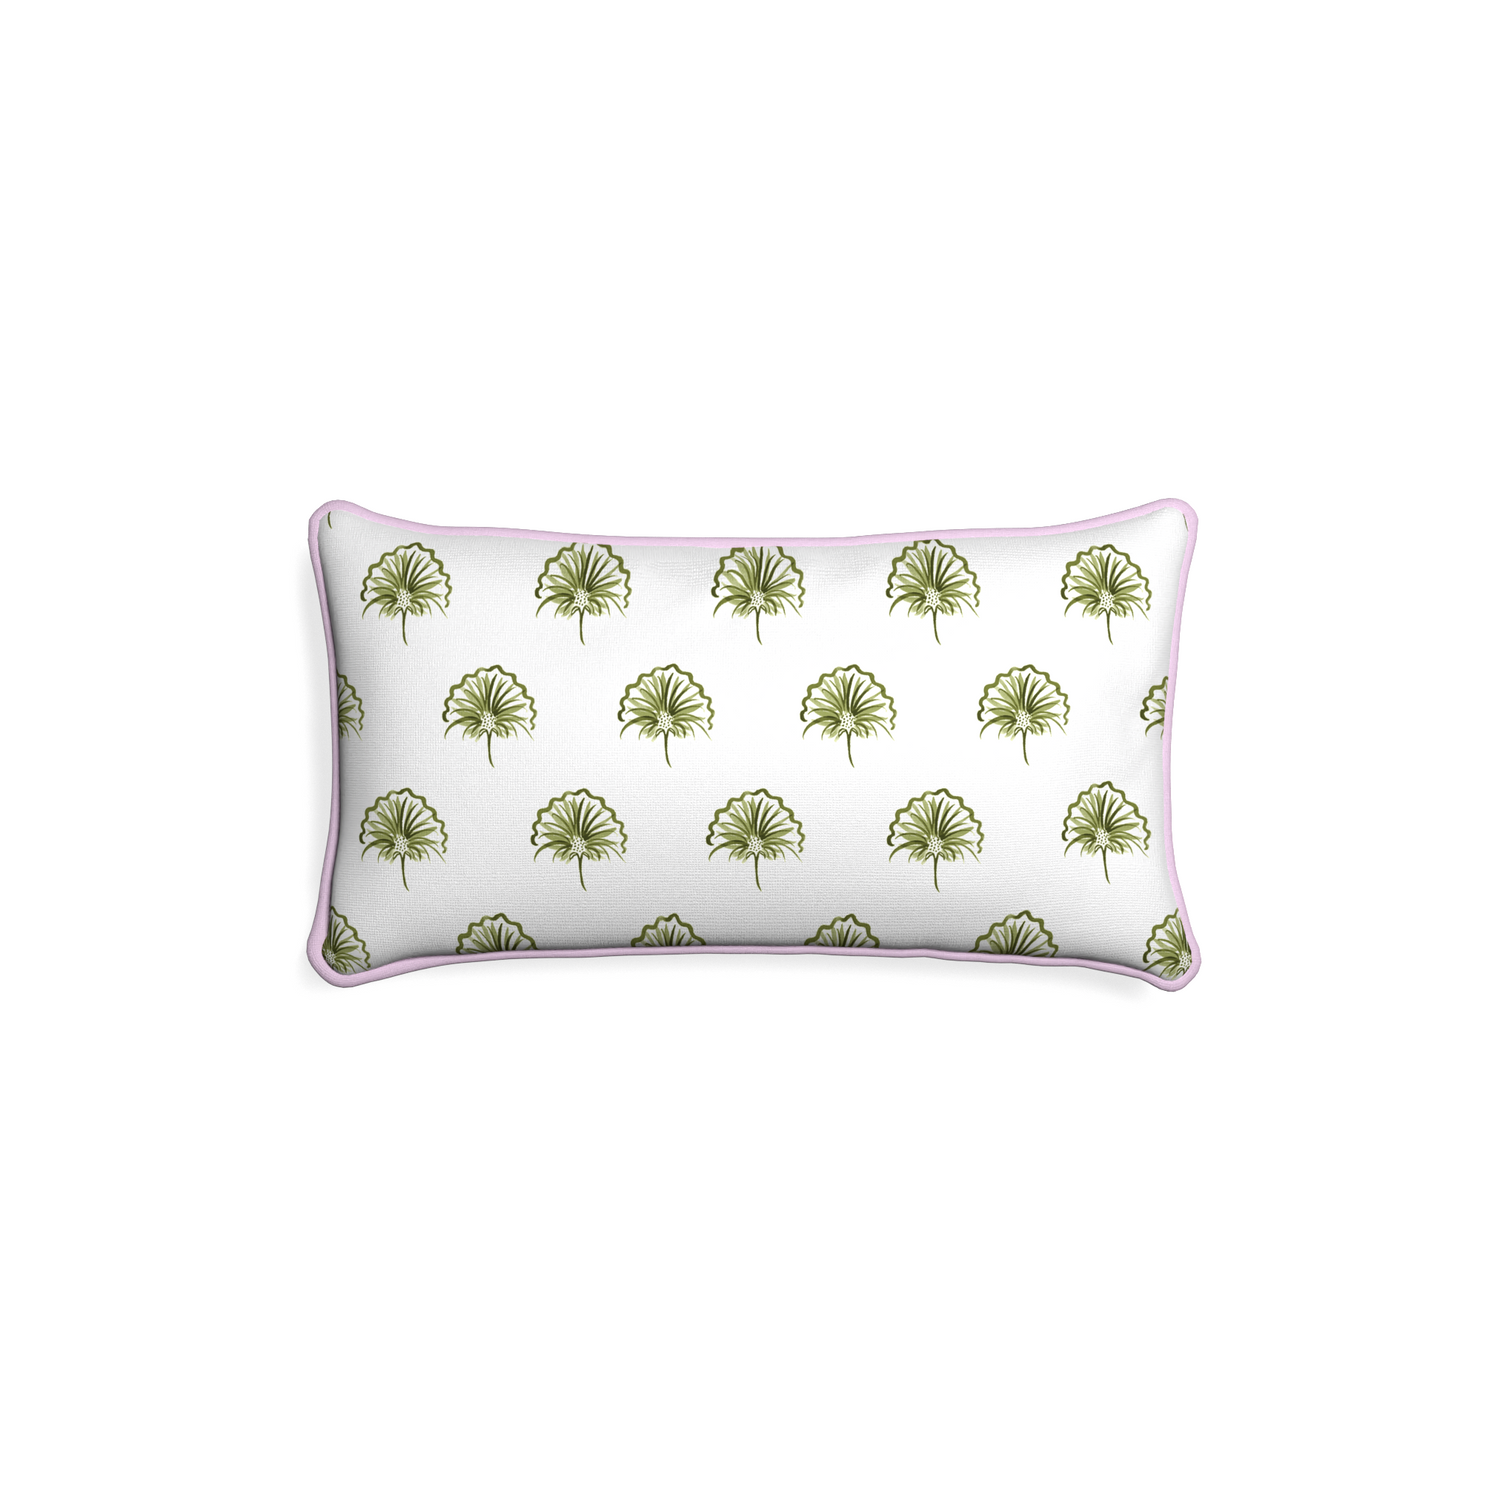 Petite-lumbar penelope moss custom green floralpillow with l piping on white background